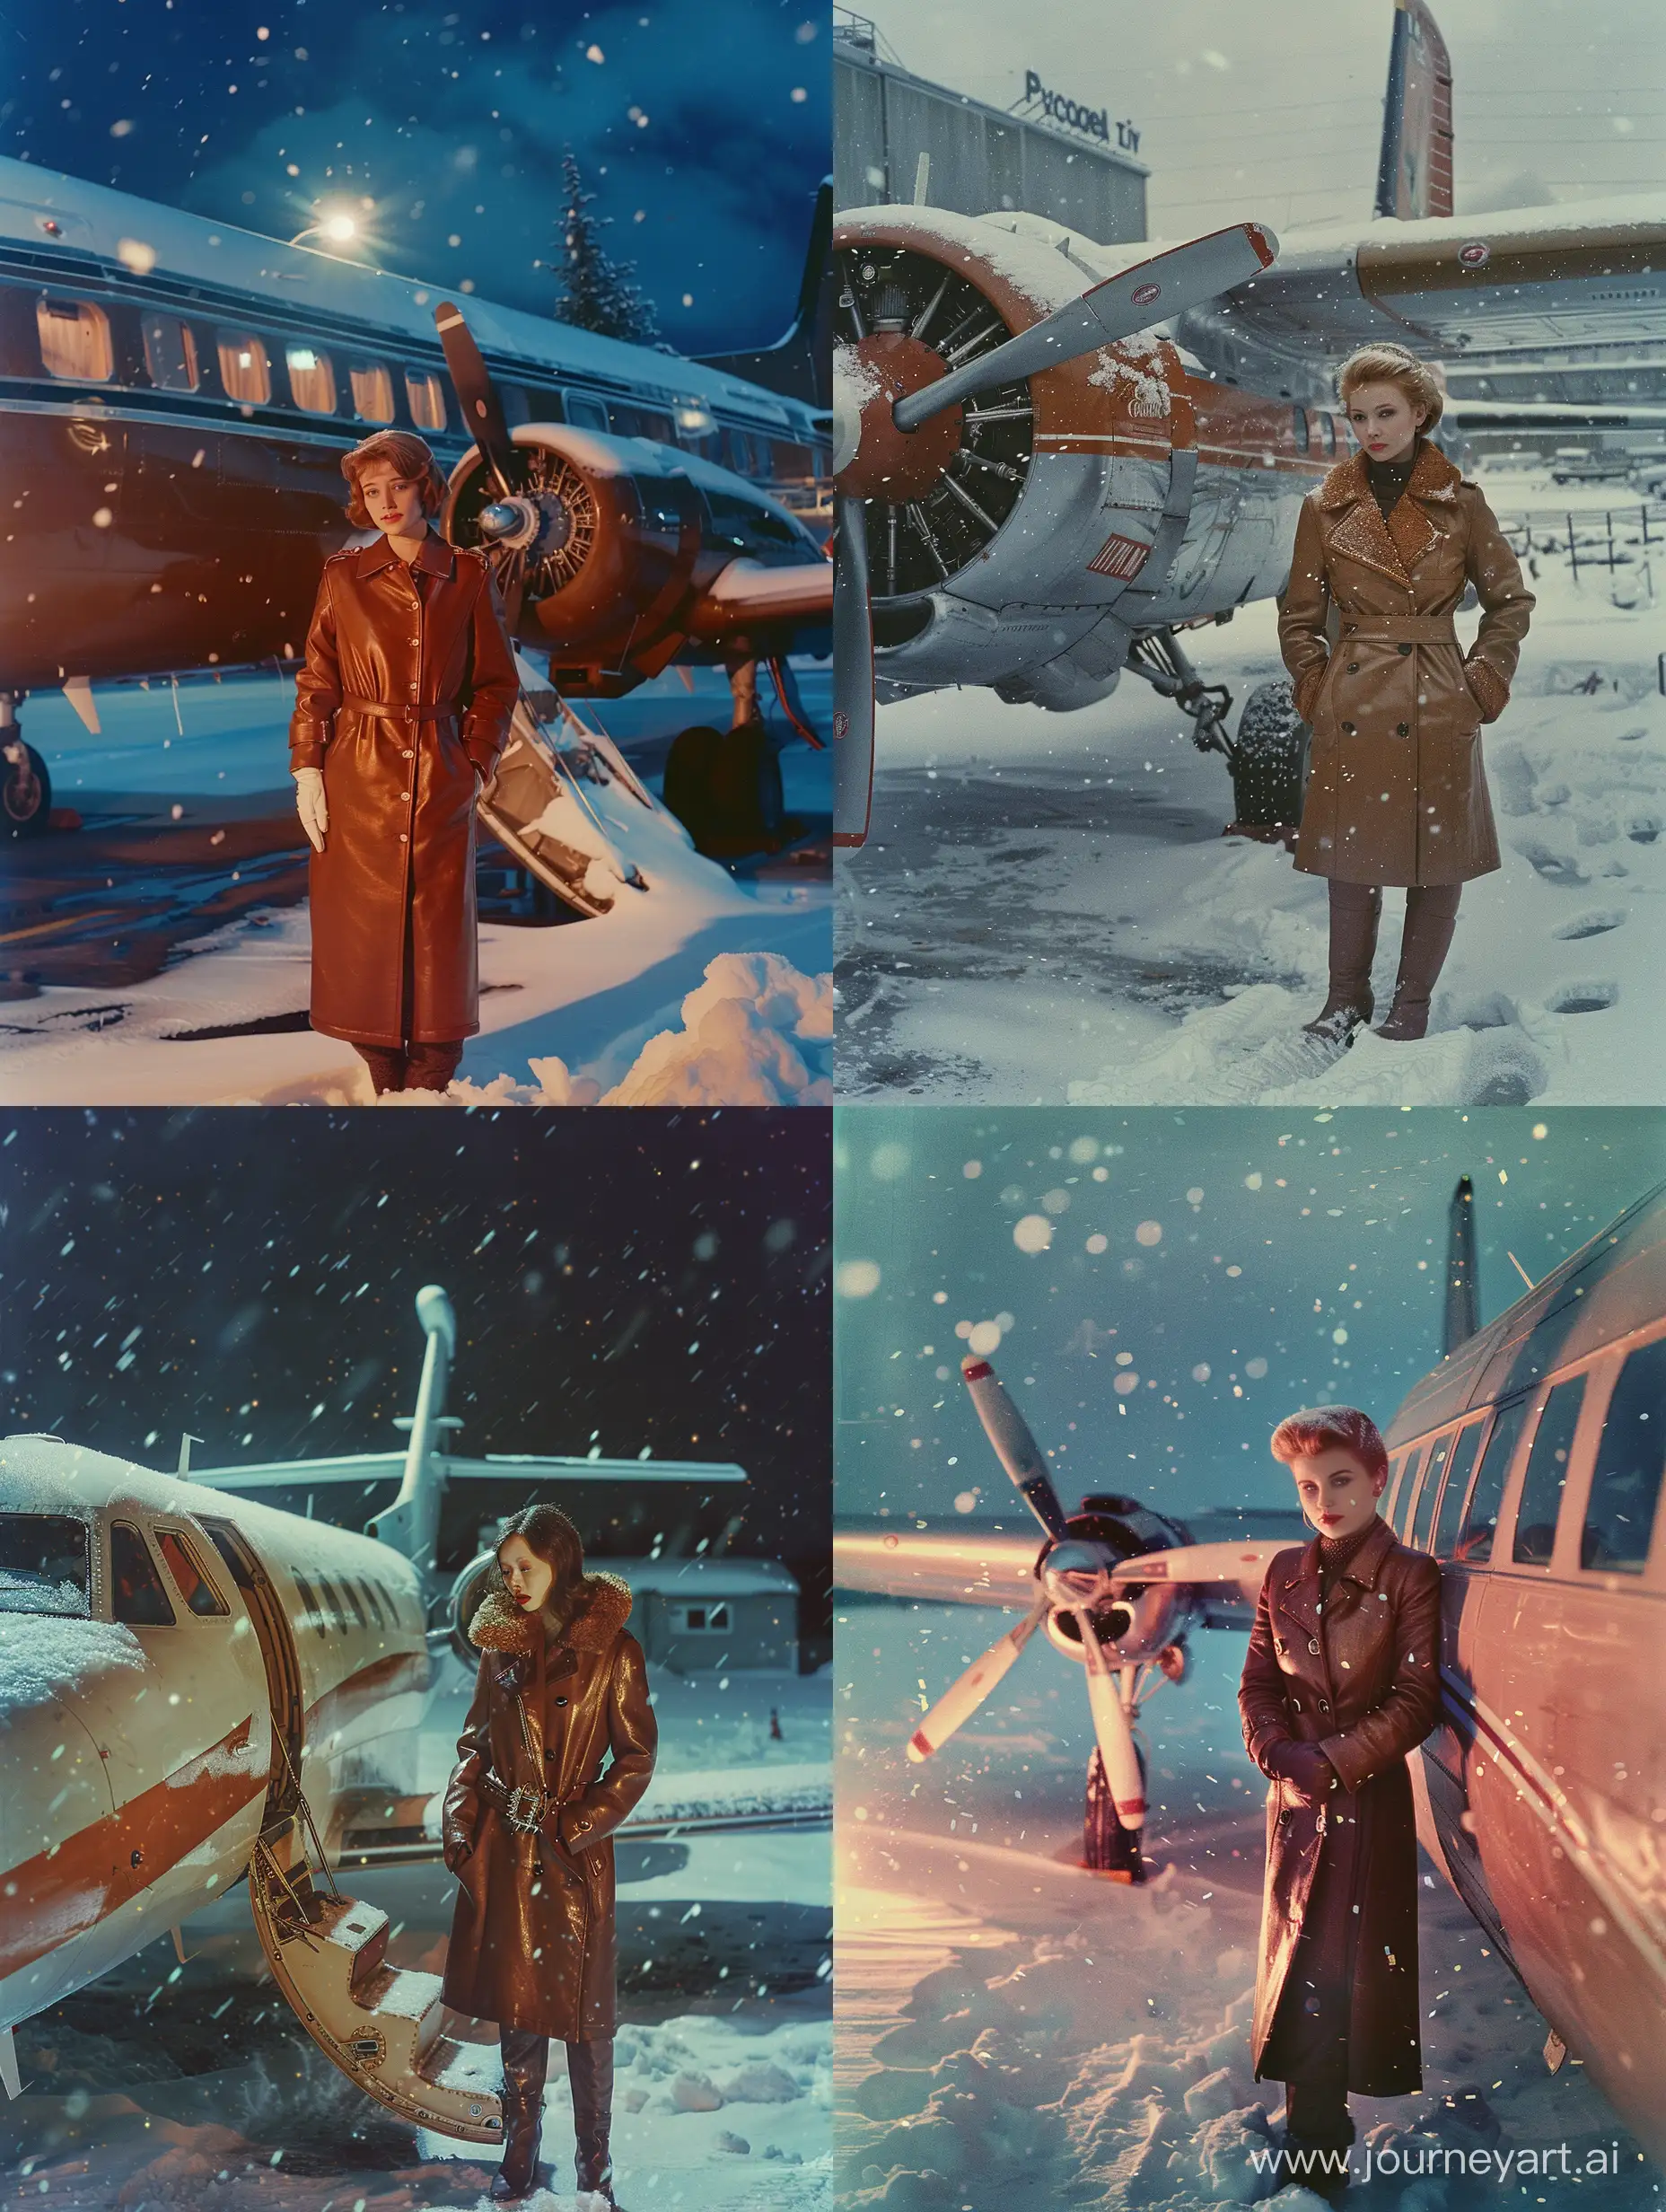 Elegant-Woman-by-SnowCovered-Airplane-An-Album-Cover-Inspired-Movie-Still